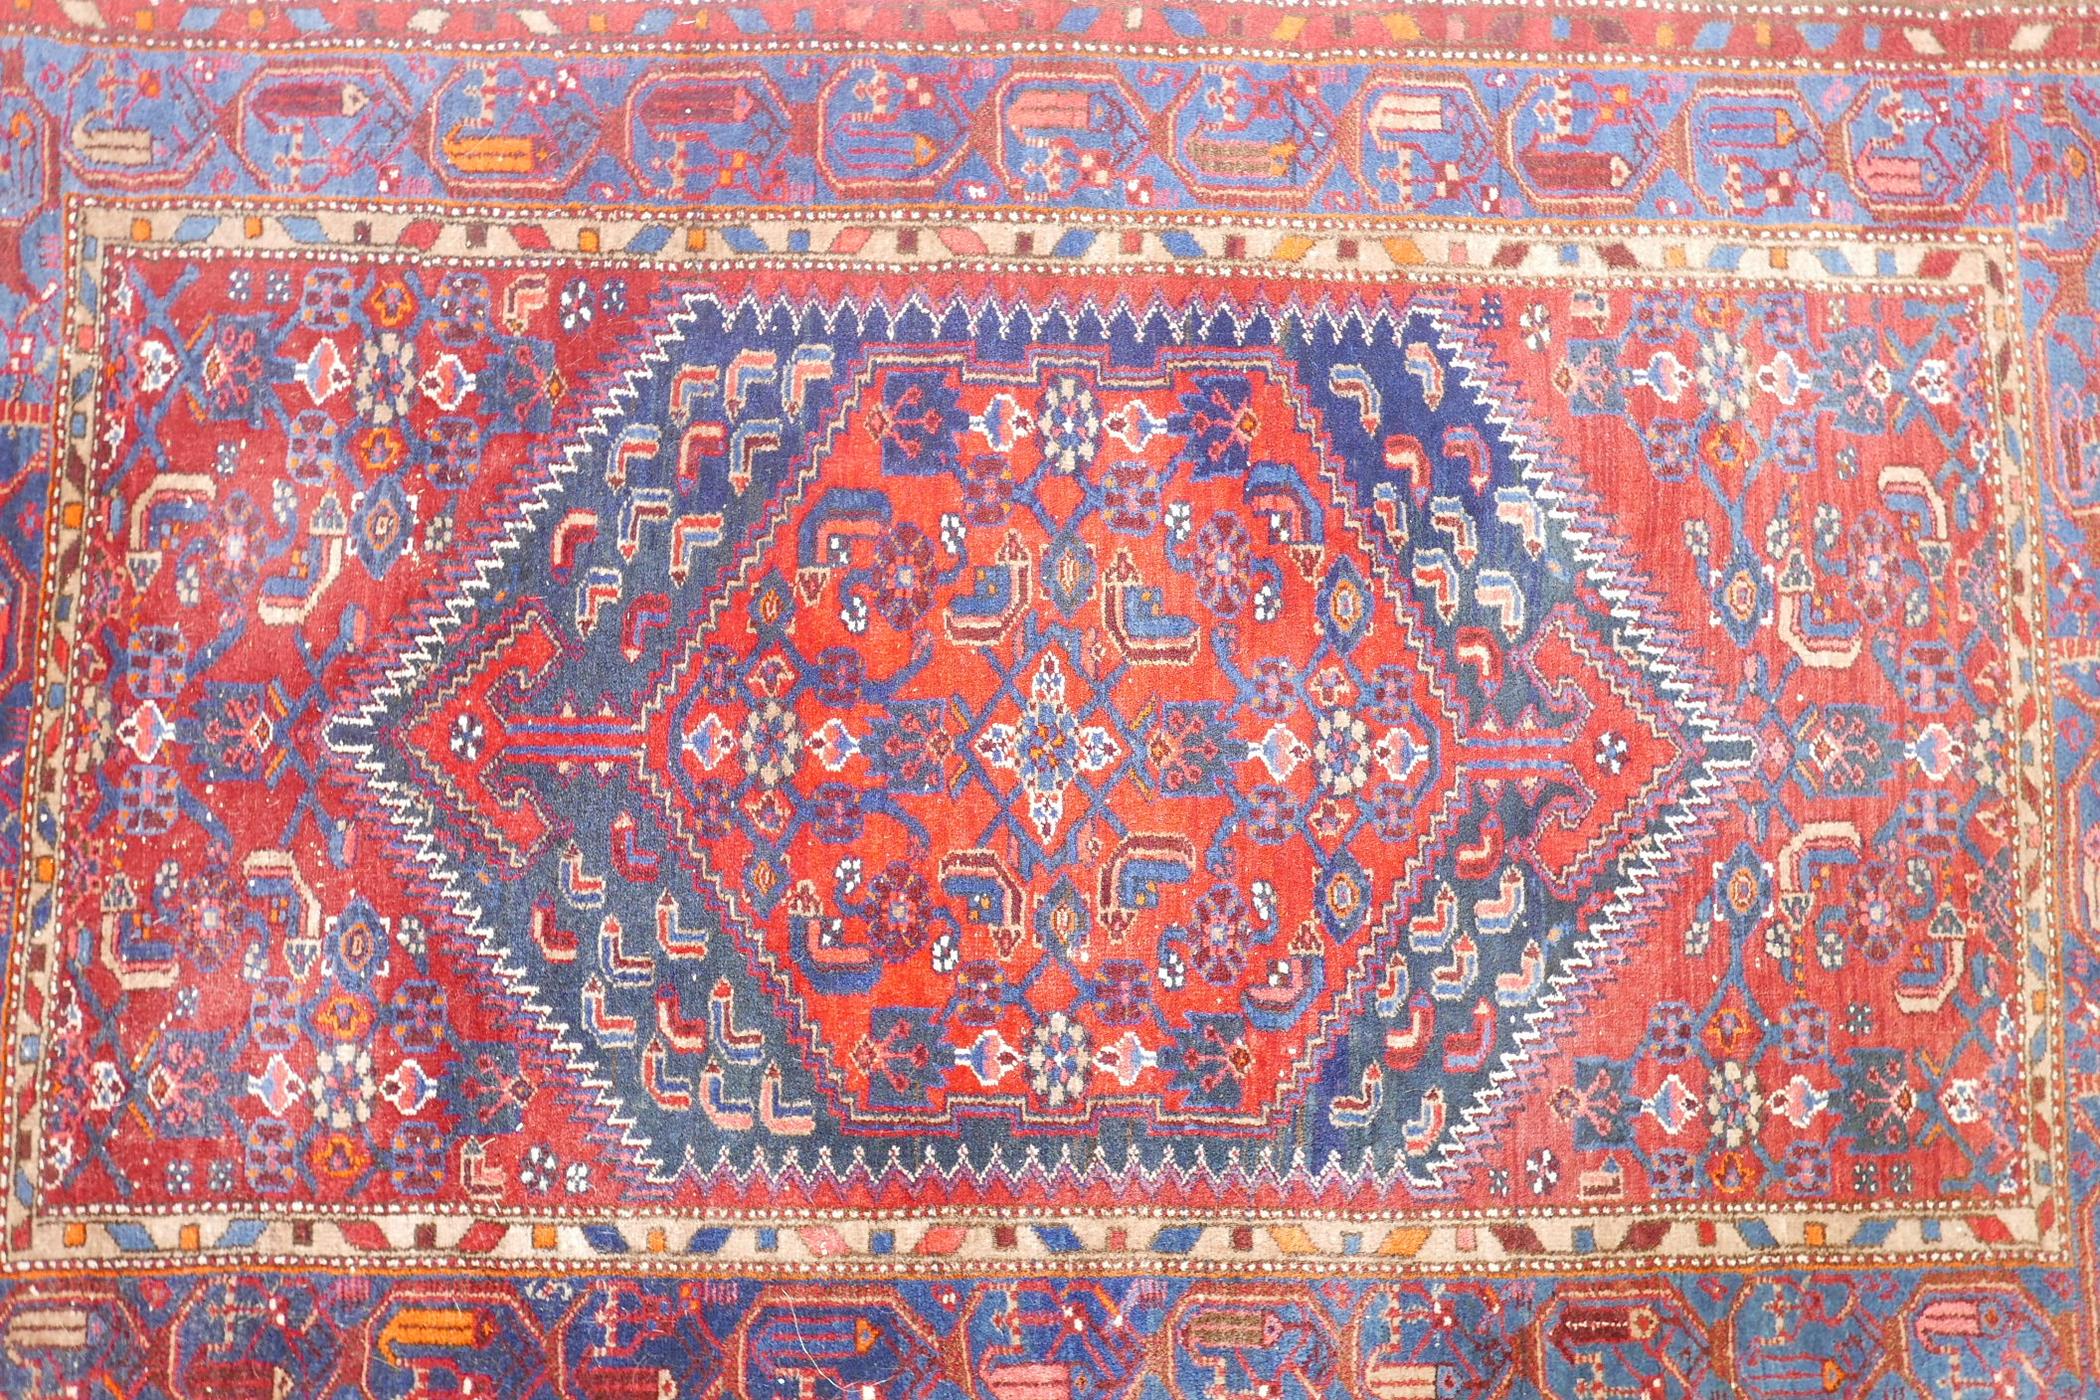 A Persian red ground wool carpet with a centralised medallion design on a blue border, 52" x 80" - Image 2 of 4